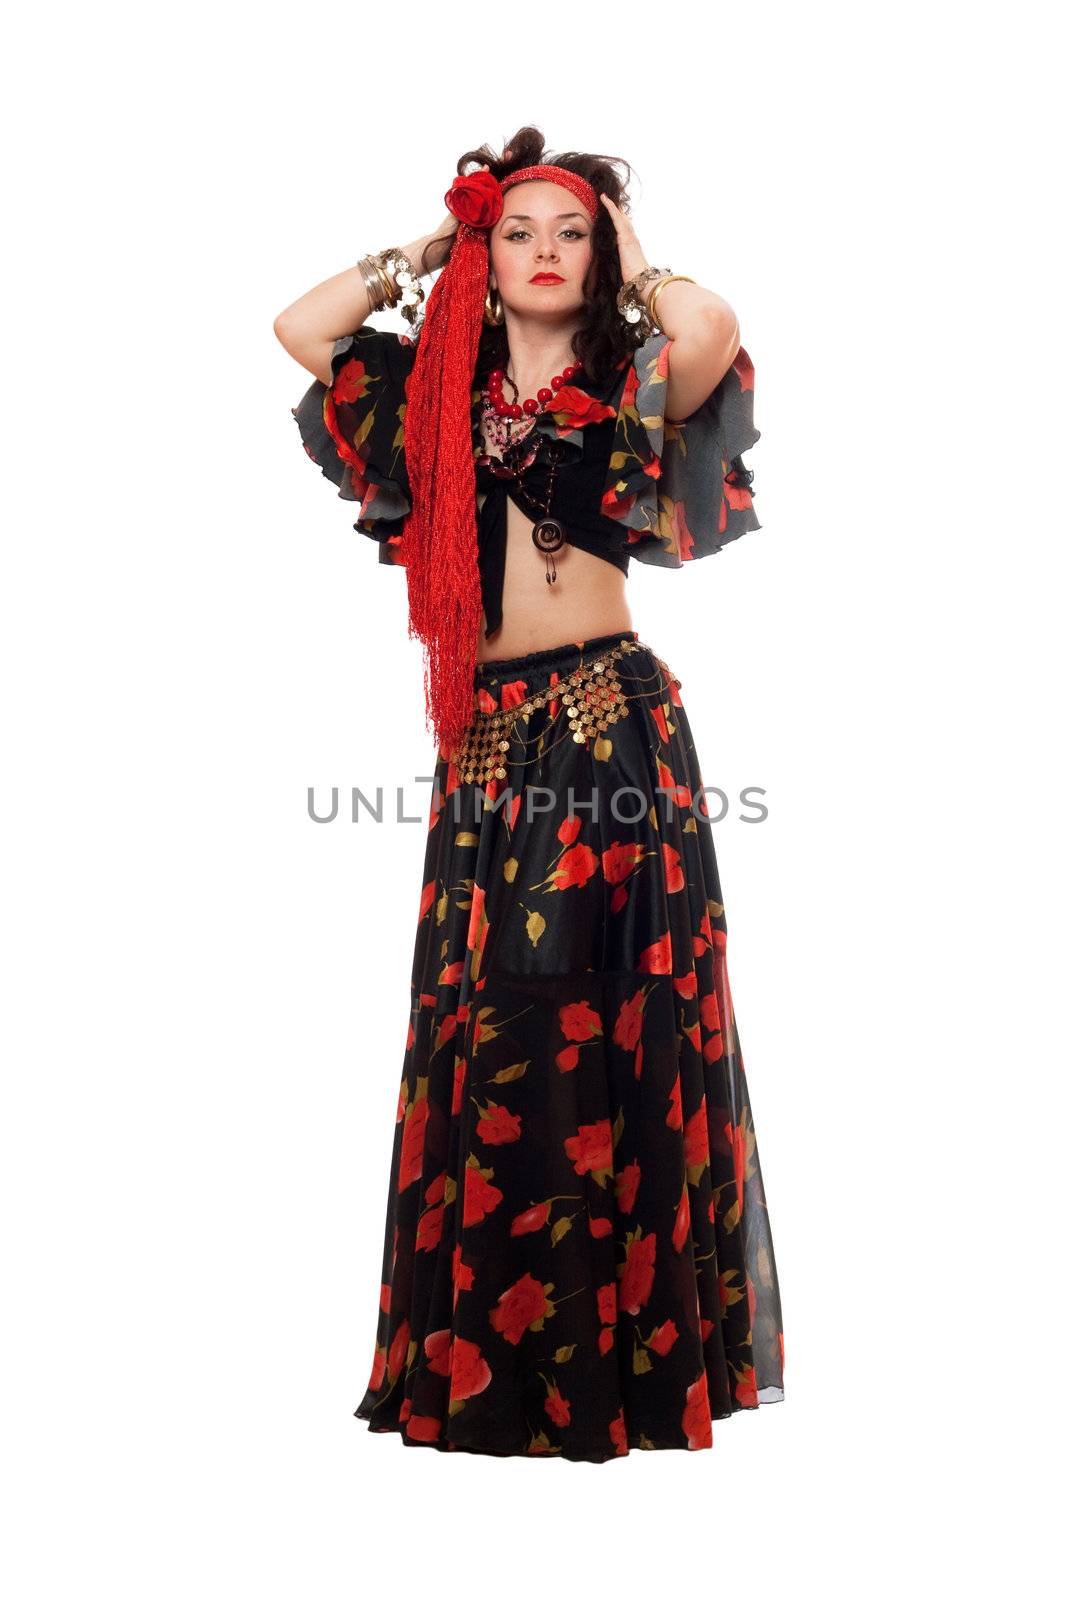 Gypsy woman in a black skirt. Isolated on white